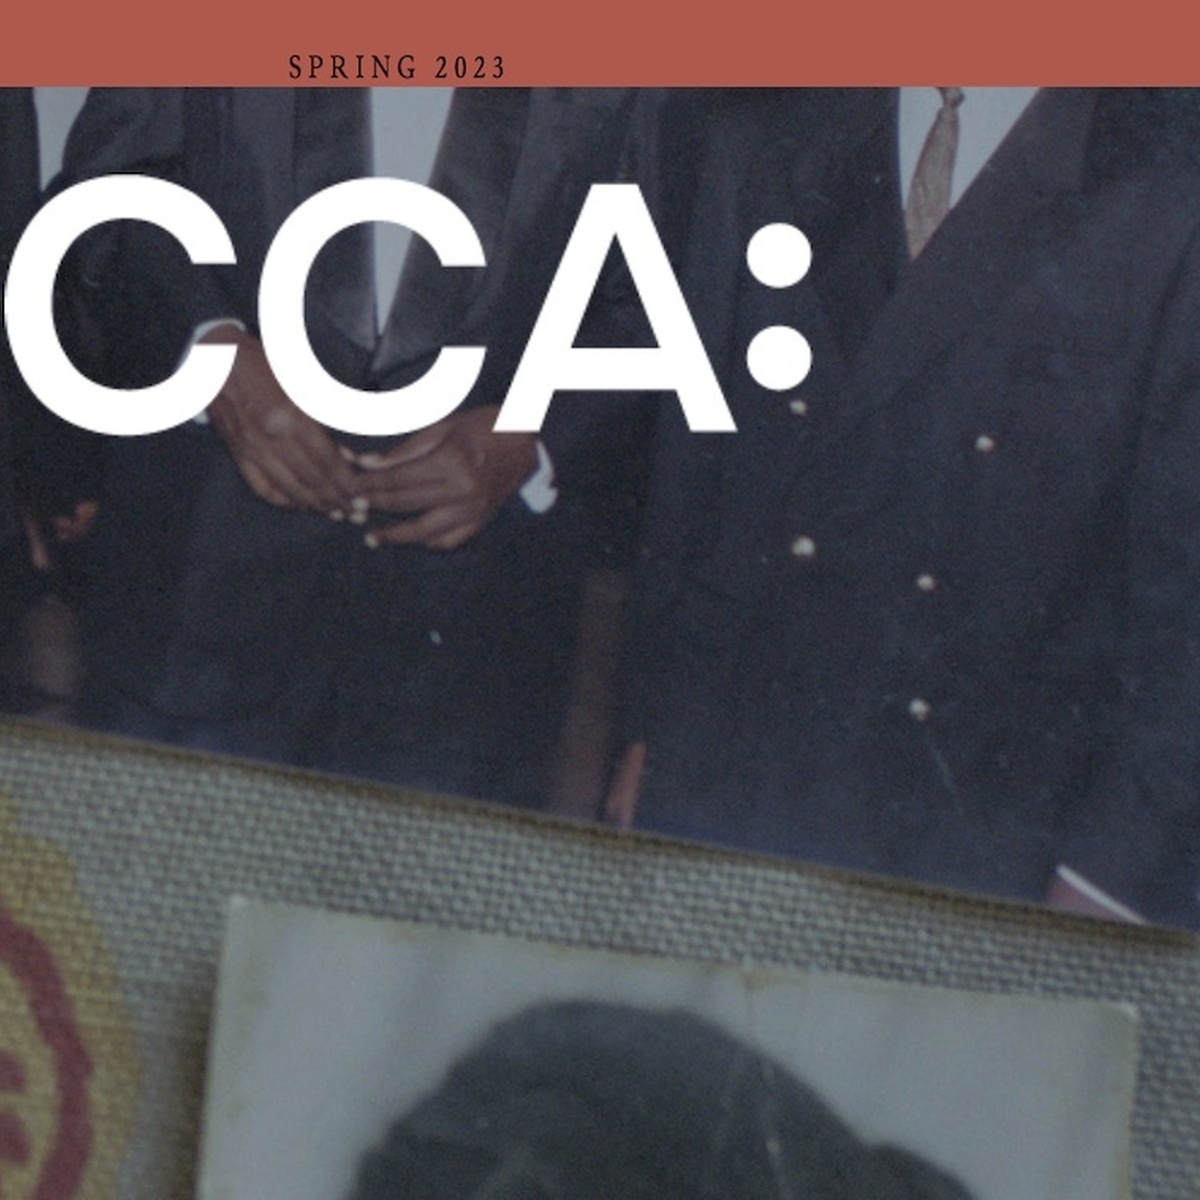 The top section of the publication cover, the CCA: logo on a still from Tuan Andrew Nguyen's film, with a red boarder